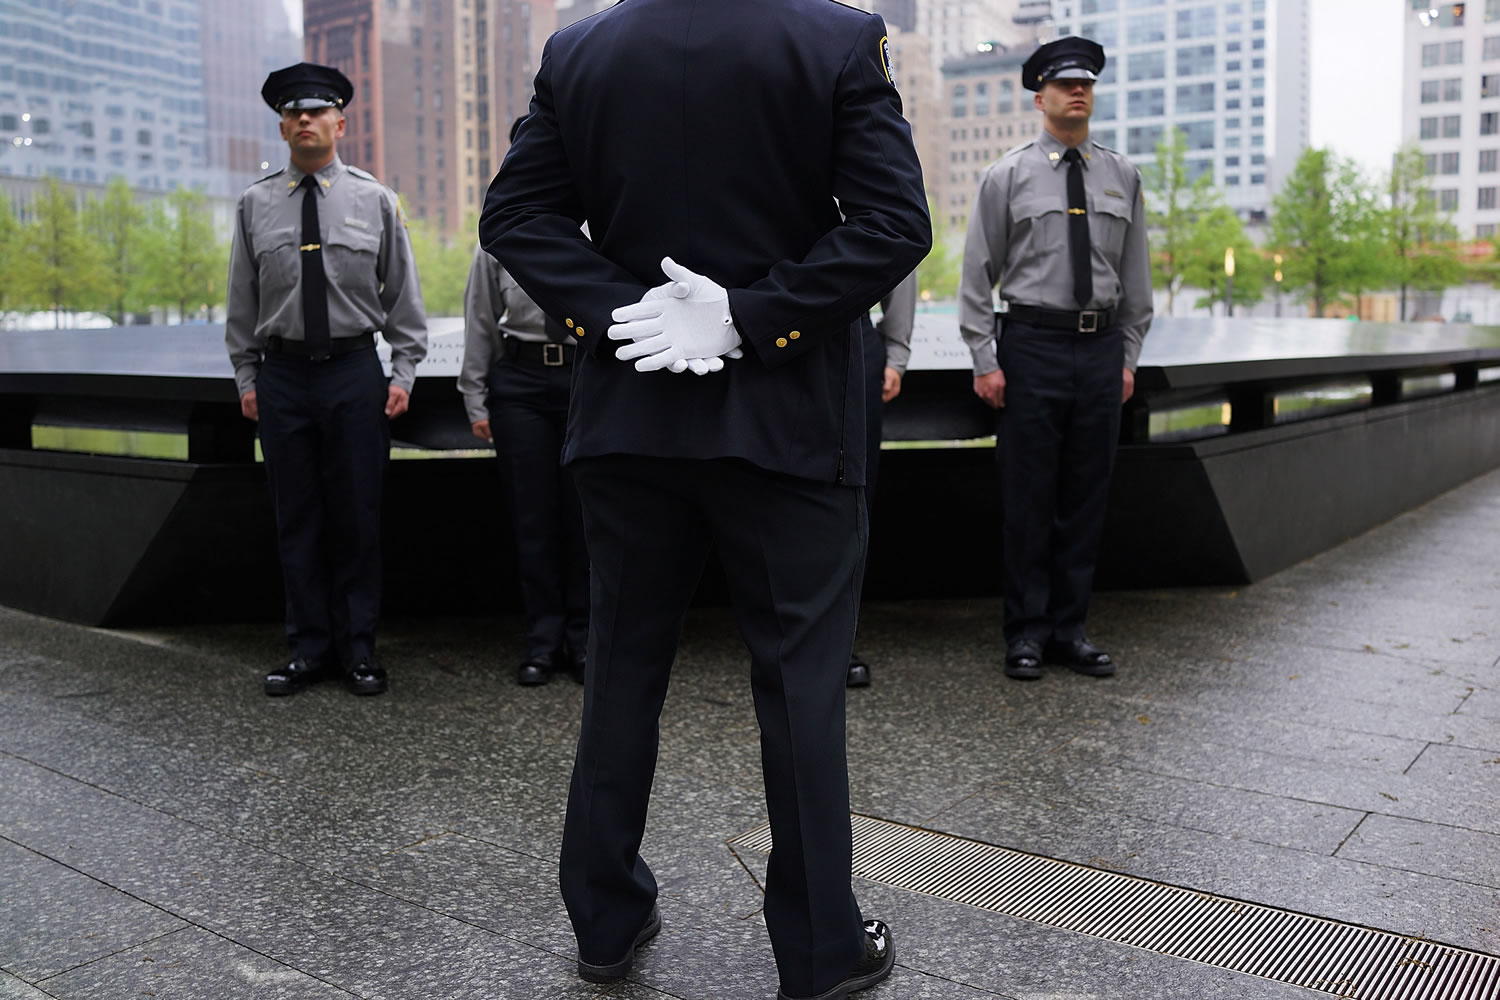 Members of the Port Authority of New York and New Jersey Police pause at the Ground Zero memorial site during the dedication ceremony of the National September 11 Memorial Museum in New York on Thursday.